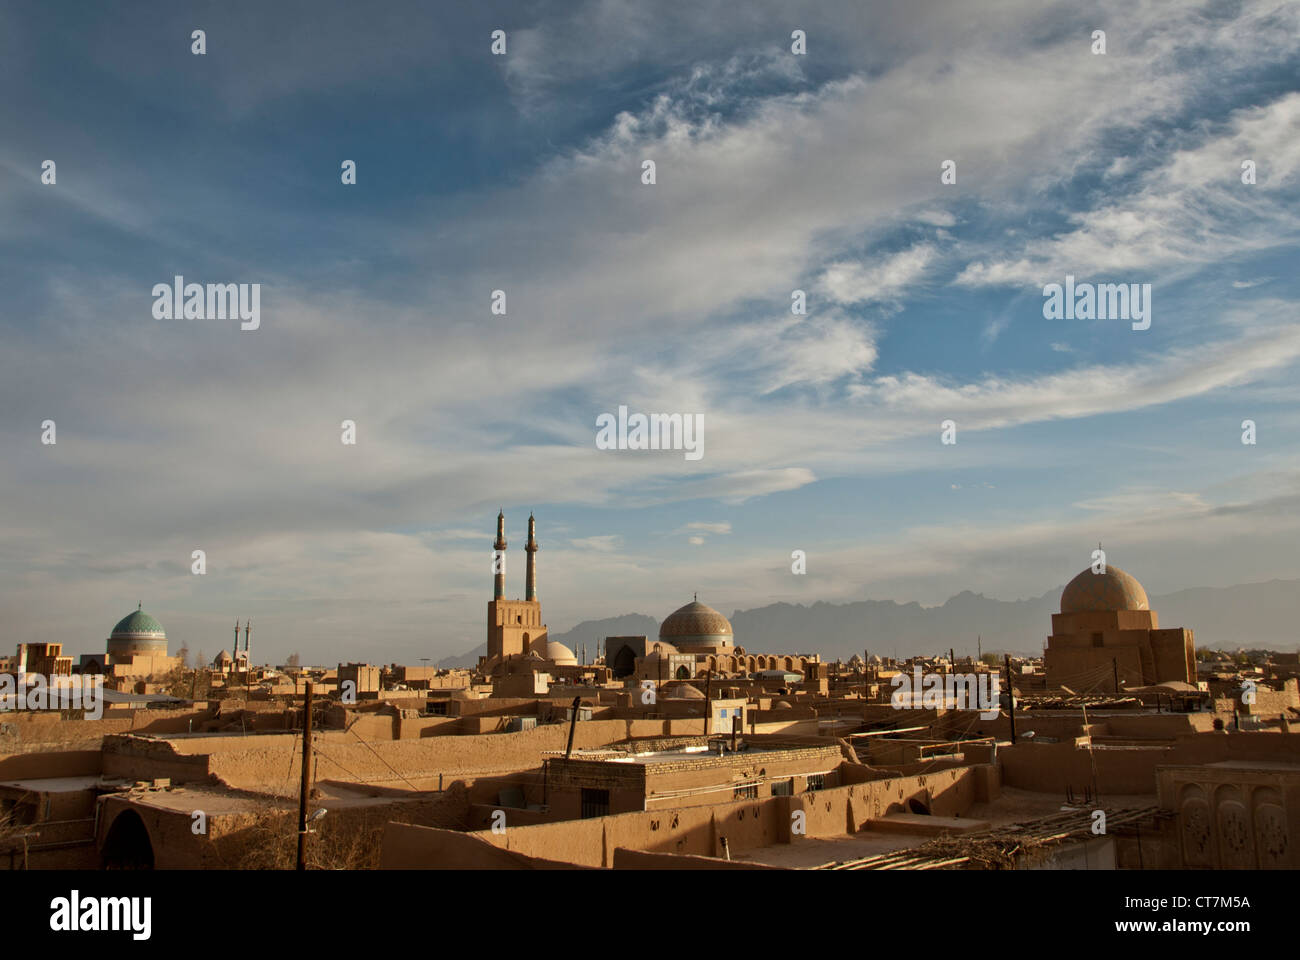 General view from the city of Yazd, Iran Stock Photo